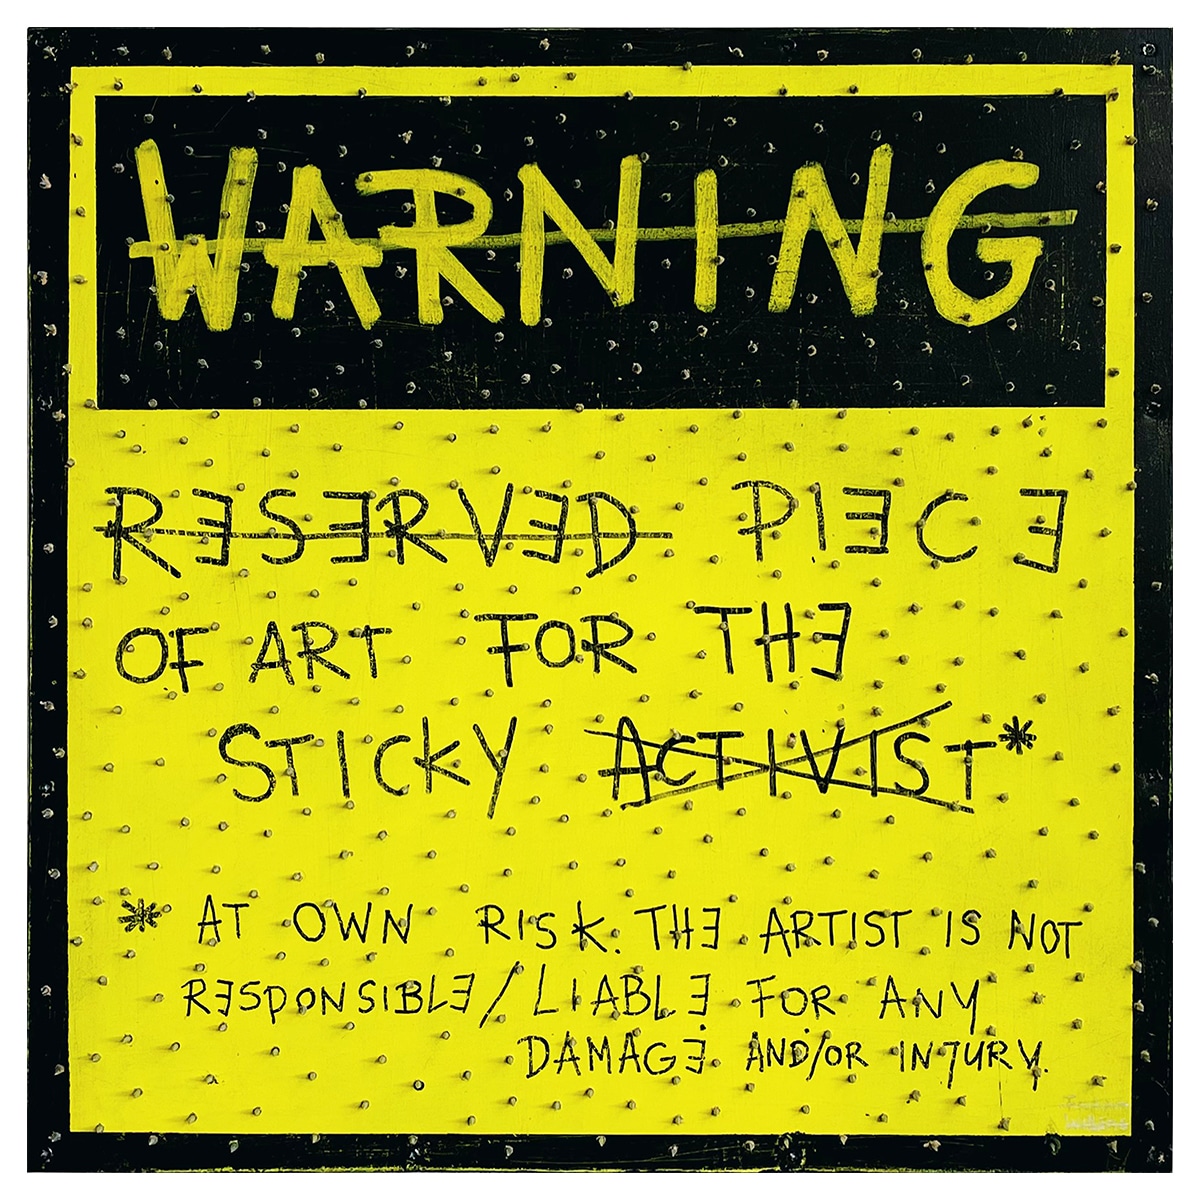 ACTIVIST-PROOF ART - RESERVED PIECE OF ART FOR THE STICKY ACTIVIST